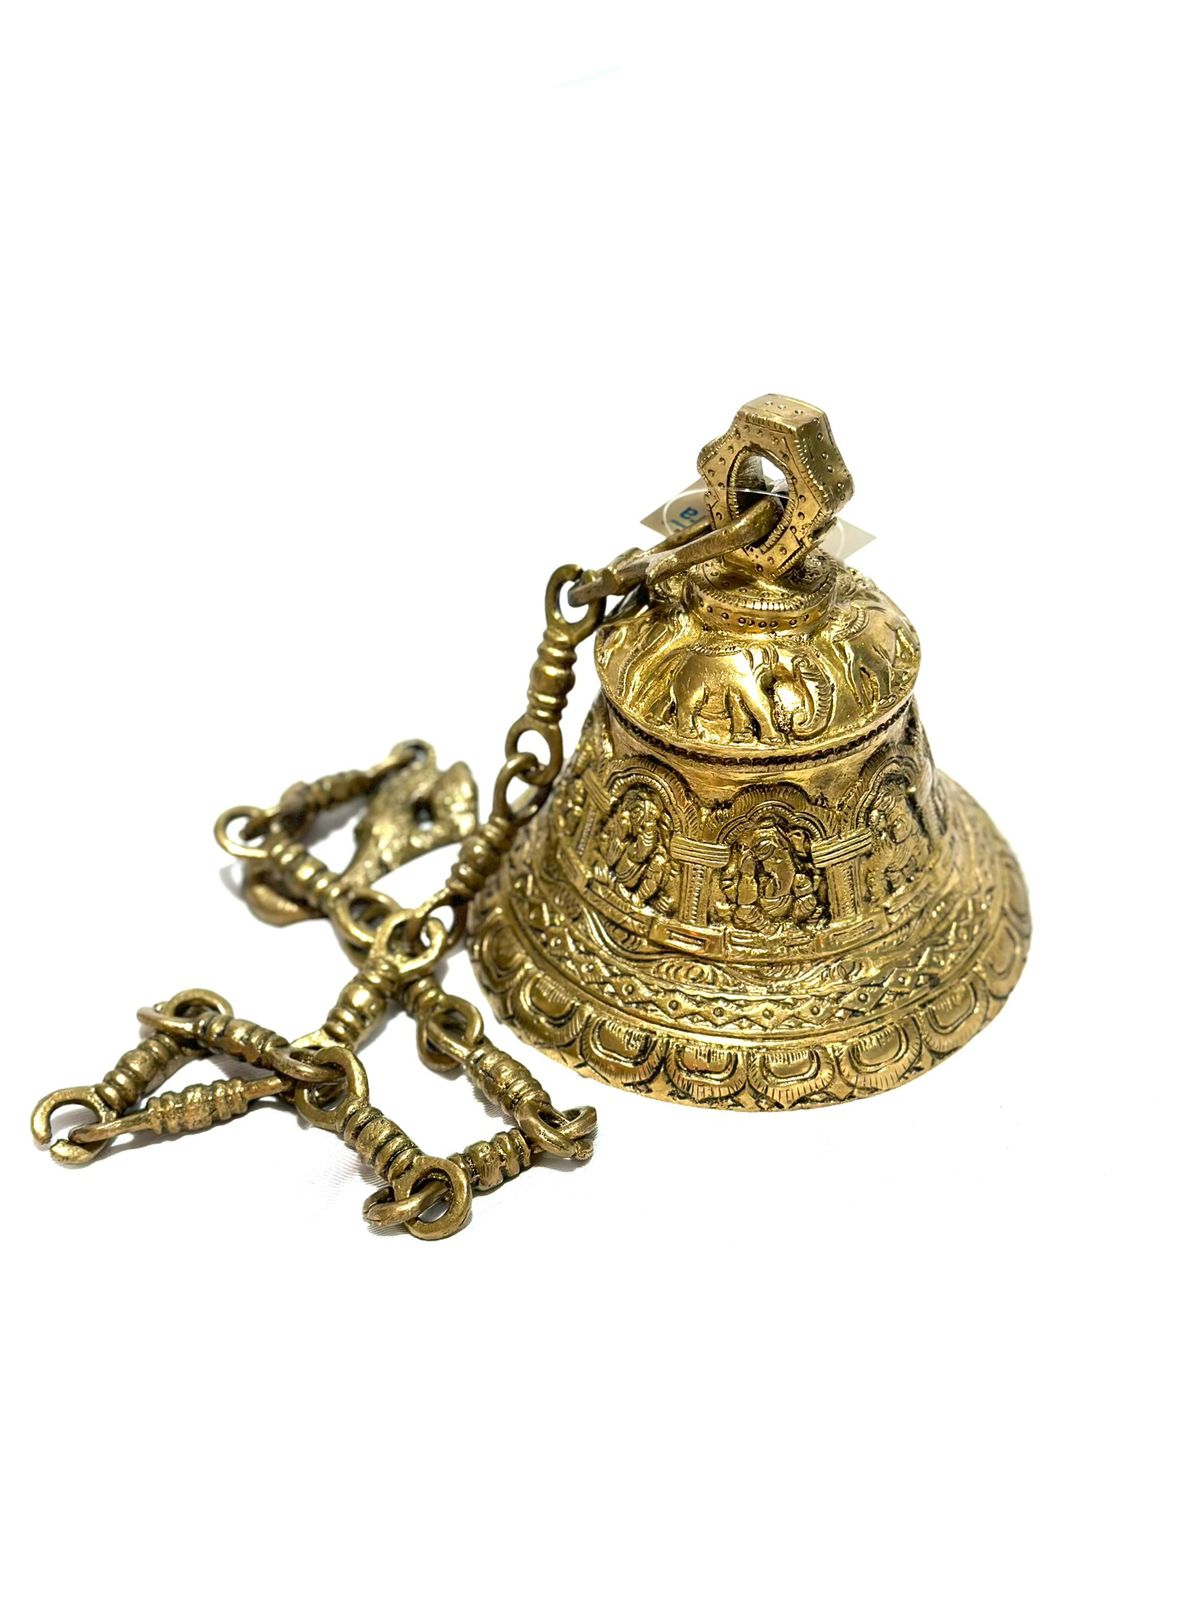 Heavy Brass Bell With Carving Exclusive Melodious Chime With Chain Tamrapatra - Tamrapatra